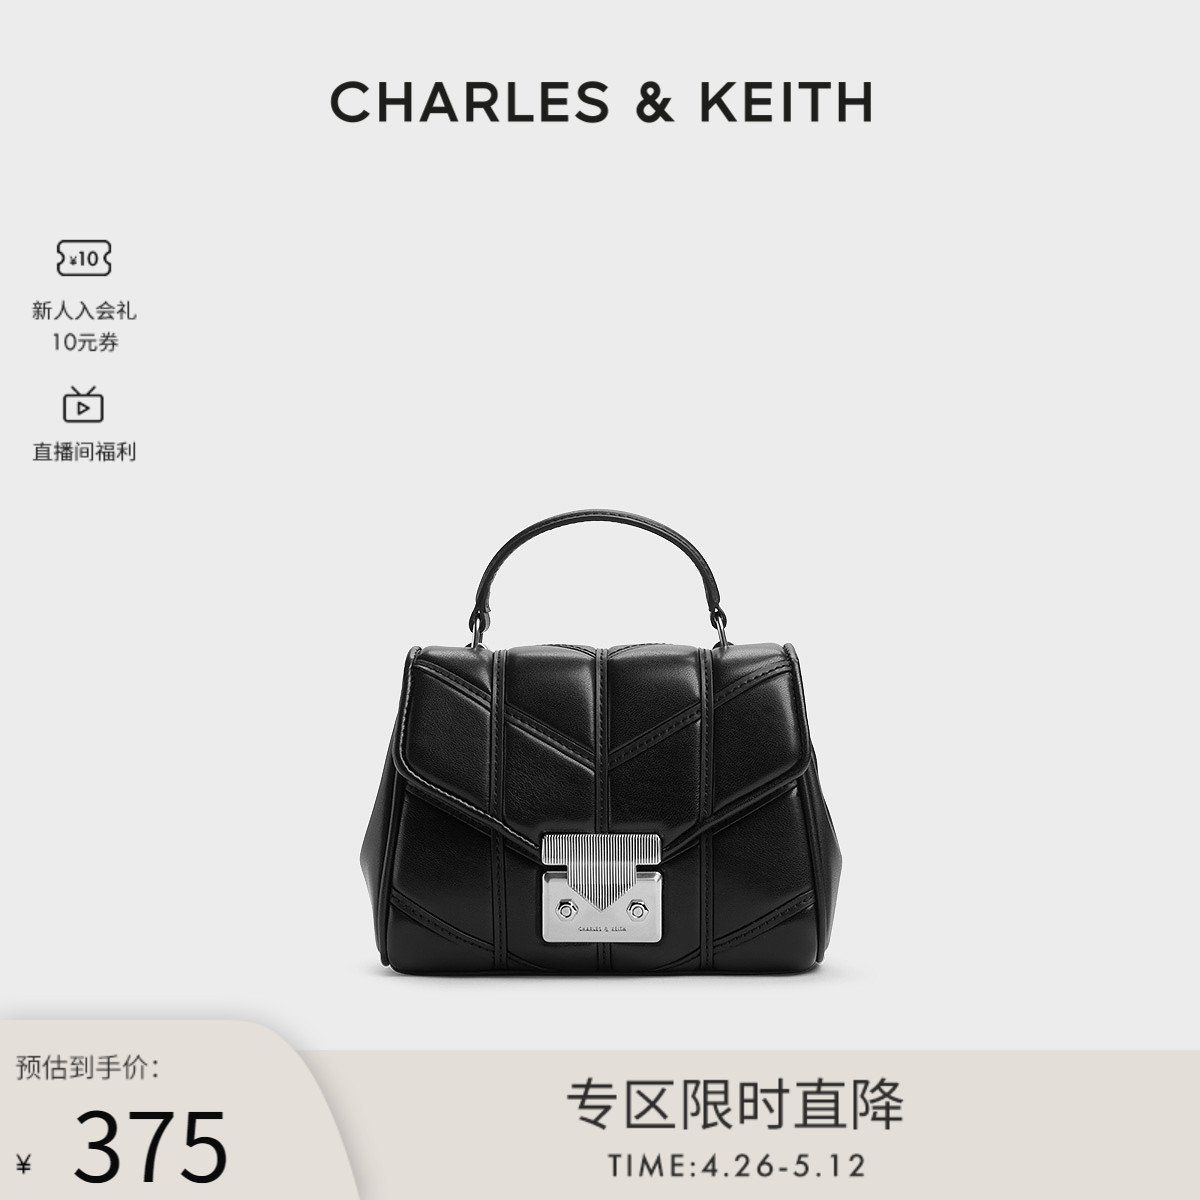 CHARLES & KEITH CHARLES&KEITH24新款CK2-50782311金属扣手提信封包 375元